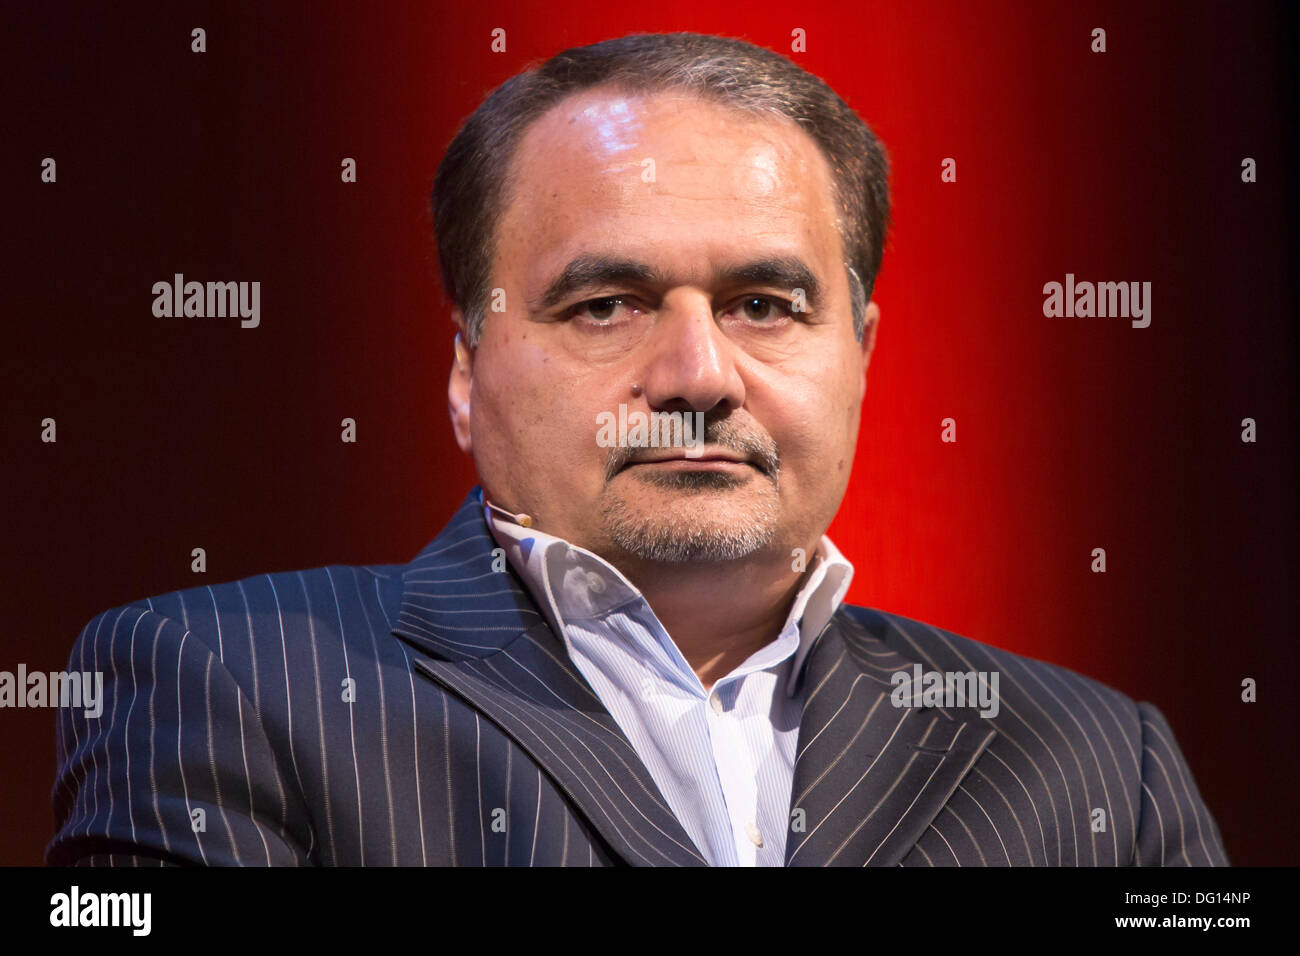 Hamburg, Germany. 10th Oct, 2013. The former Iranian nuclear negotiator Hossein Mousavian speaks during a panel discussion of the Koerber Foundation in Hamburg, Germany, 10 October 2013. Photo: Maja Hitij/dpa/Alamy Live News Stock Photo